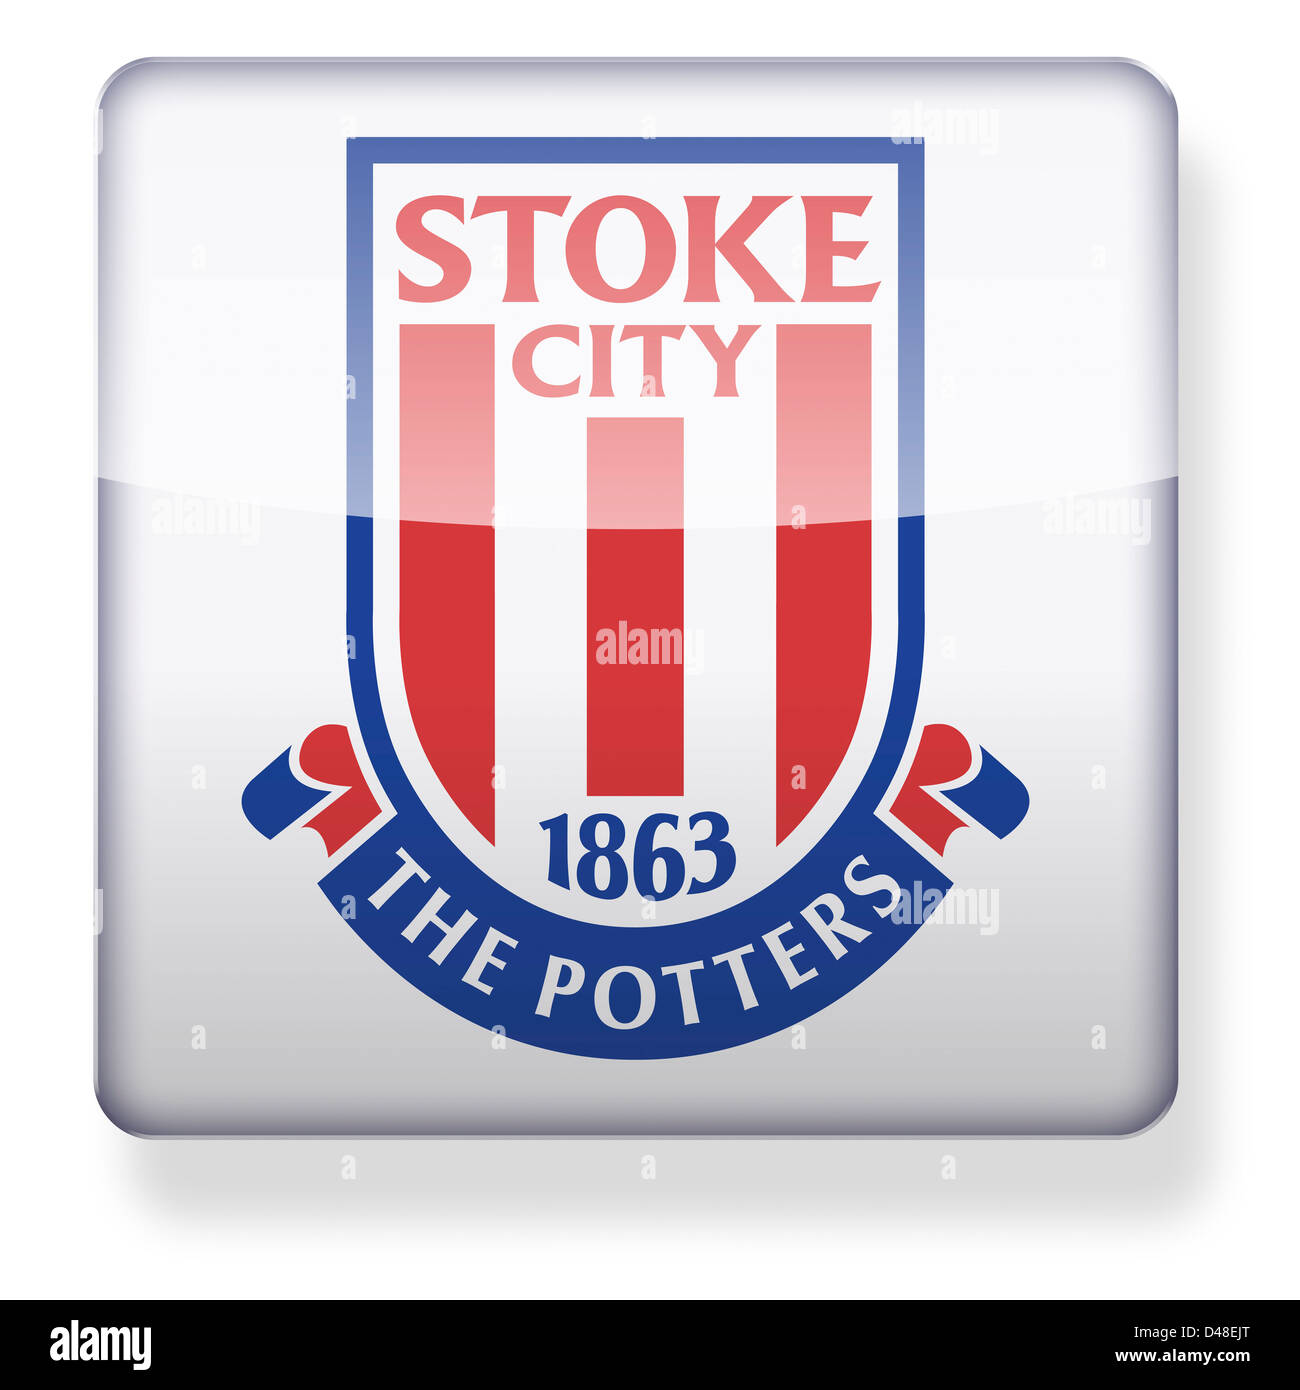 Stoke City football club logo as an app icon. Clipping path included. Stock Photo